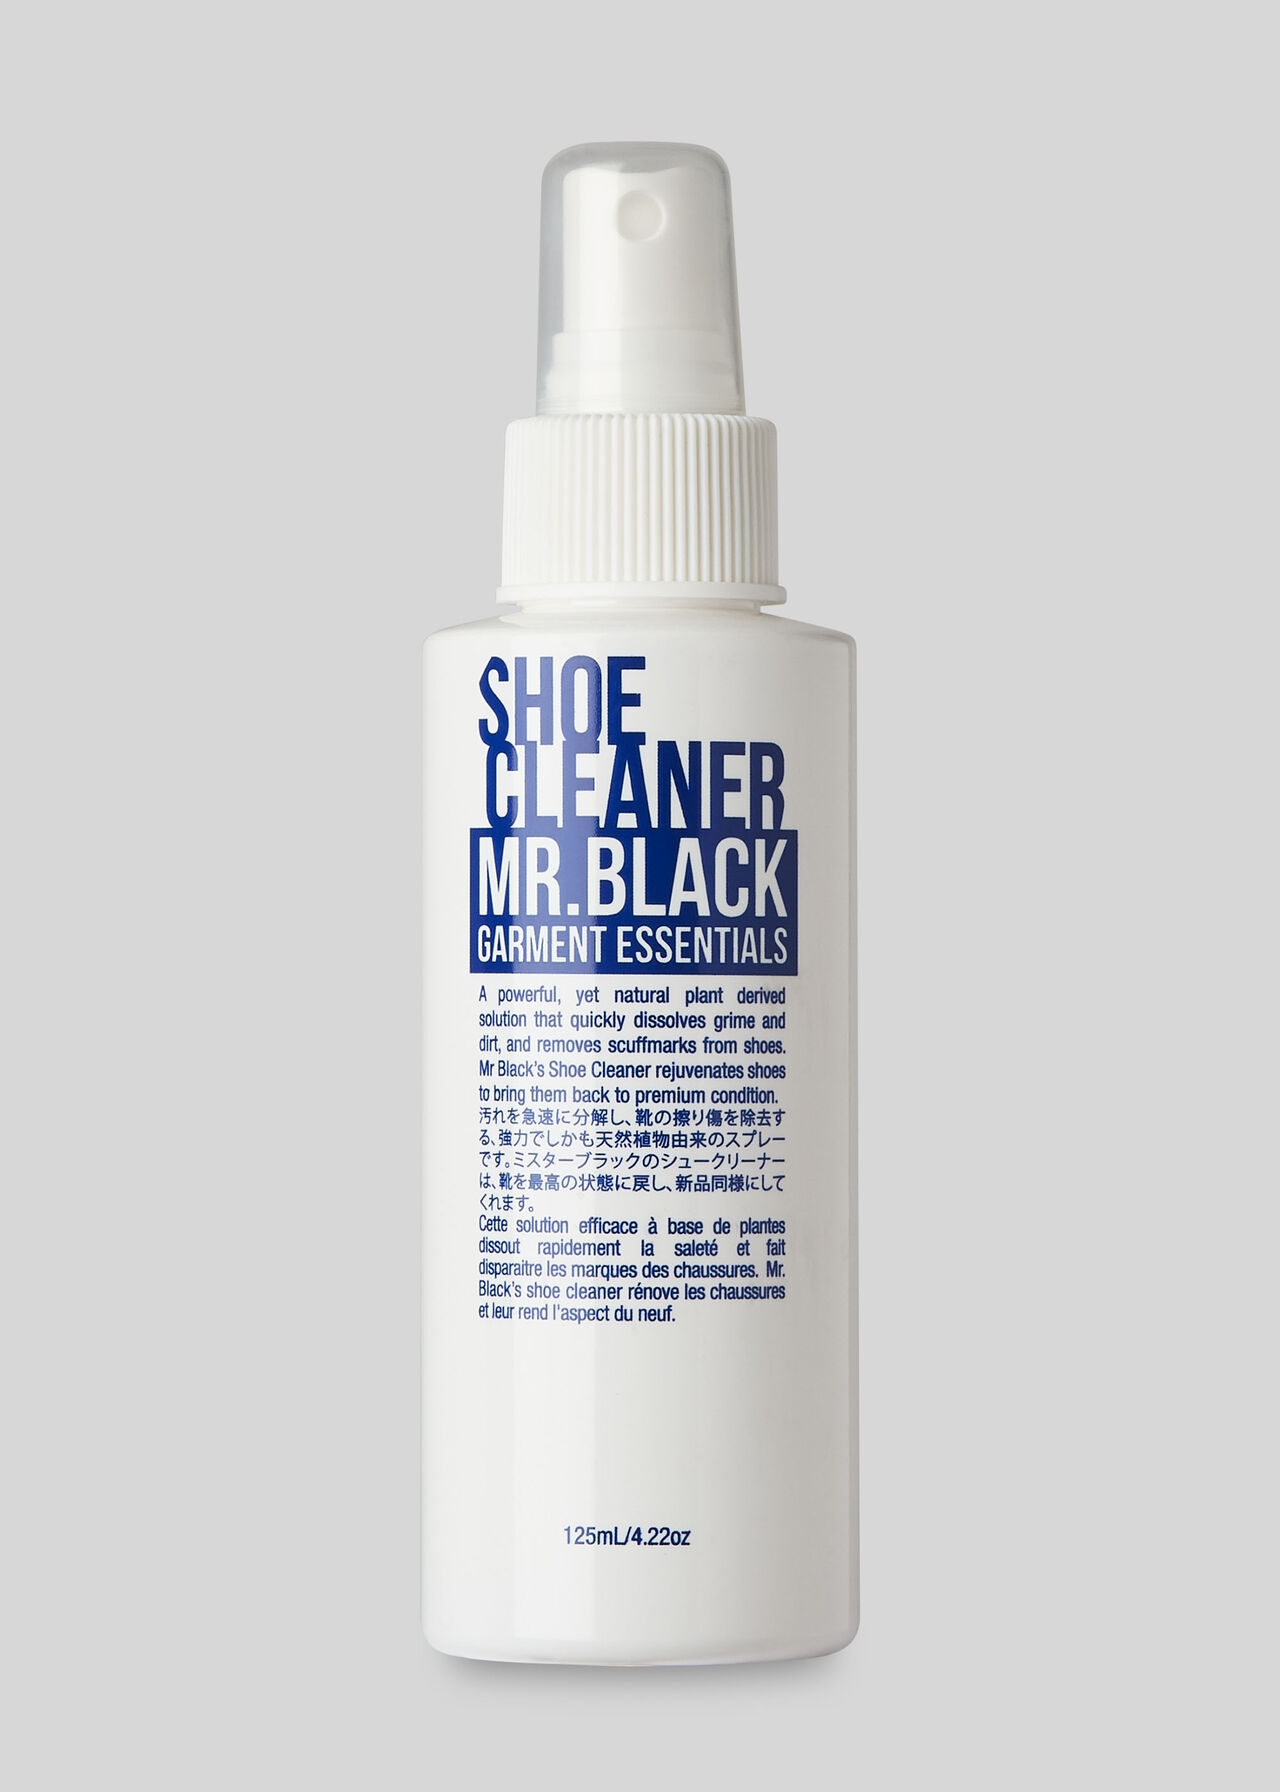 Mr Black Shoe Cleaner Not Applicable